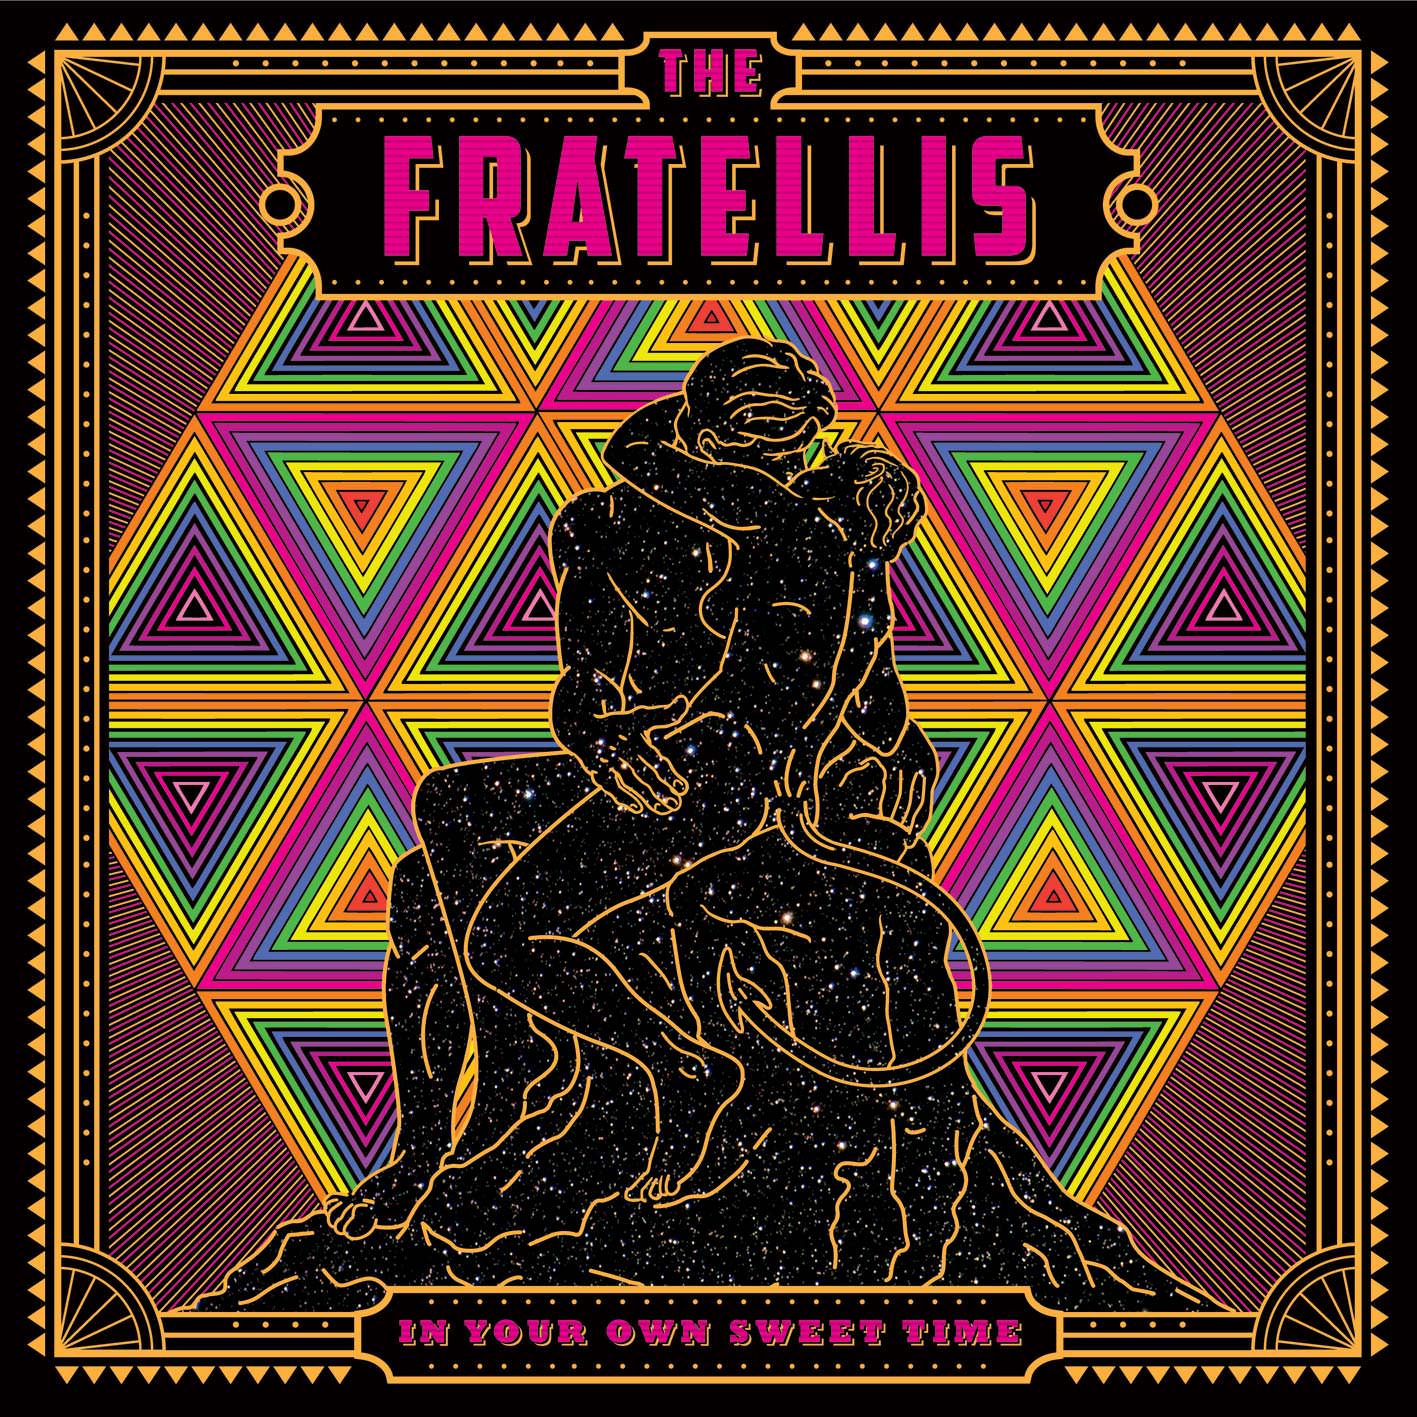 The Fratellis – In Your Own Sweet Time (2018) [7Digital FLAC 24bit/96kHz]